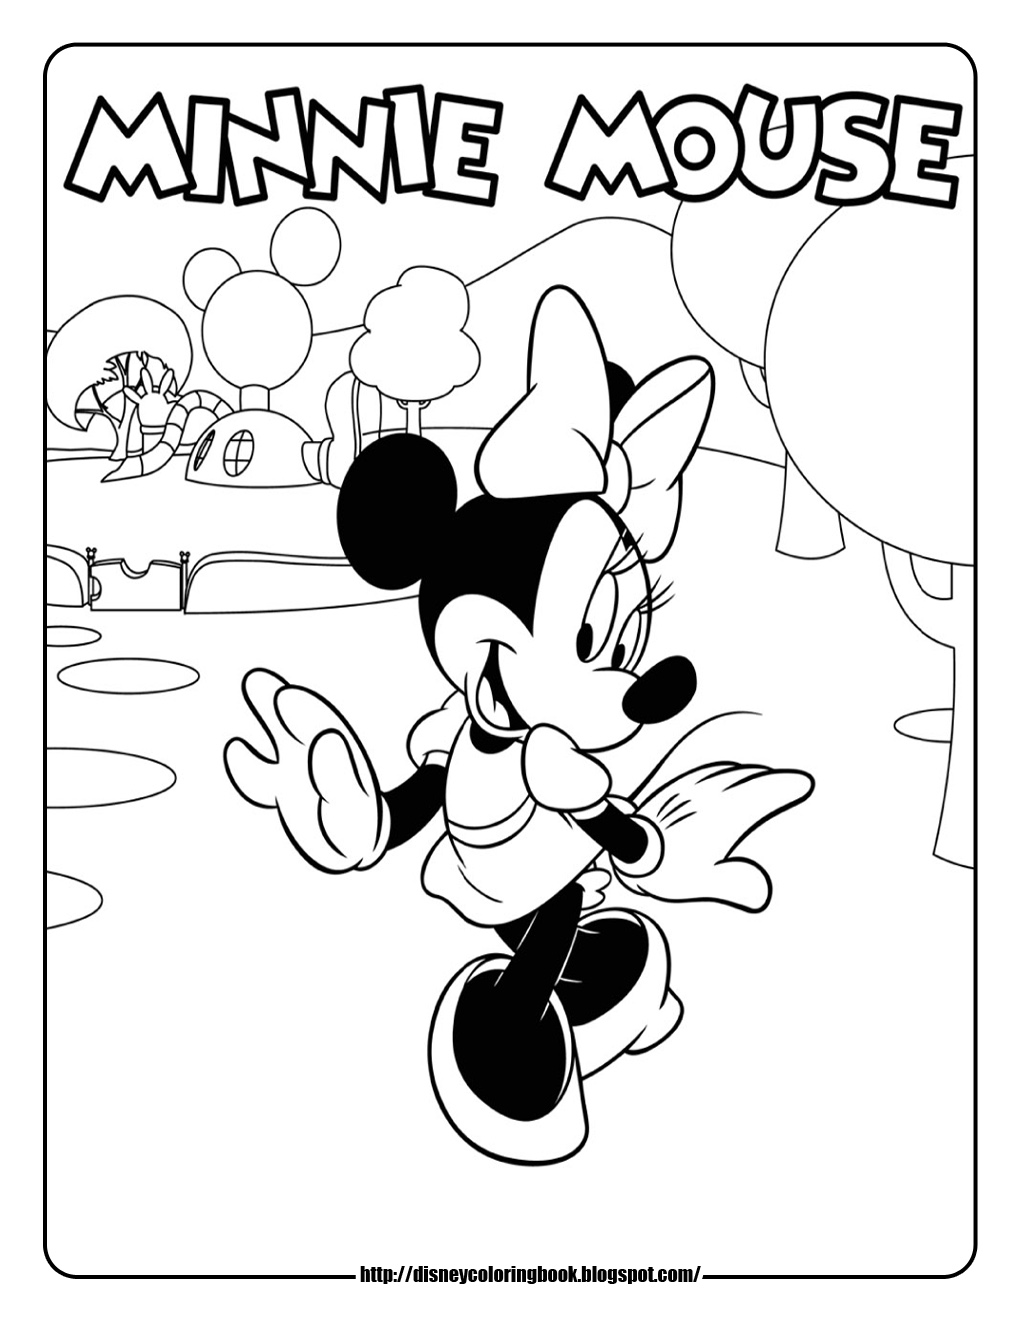 mickey-mouse-clubhouse-1-free-disney-coloring-sheets-learn-to-coloring